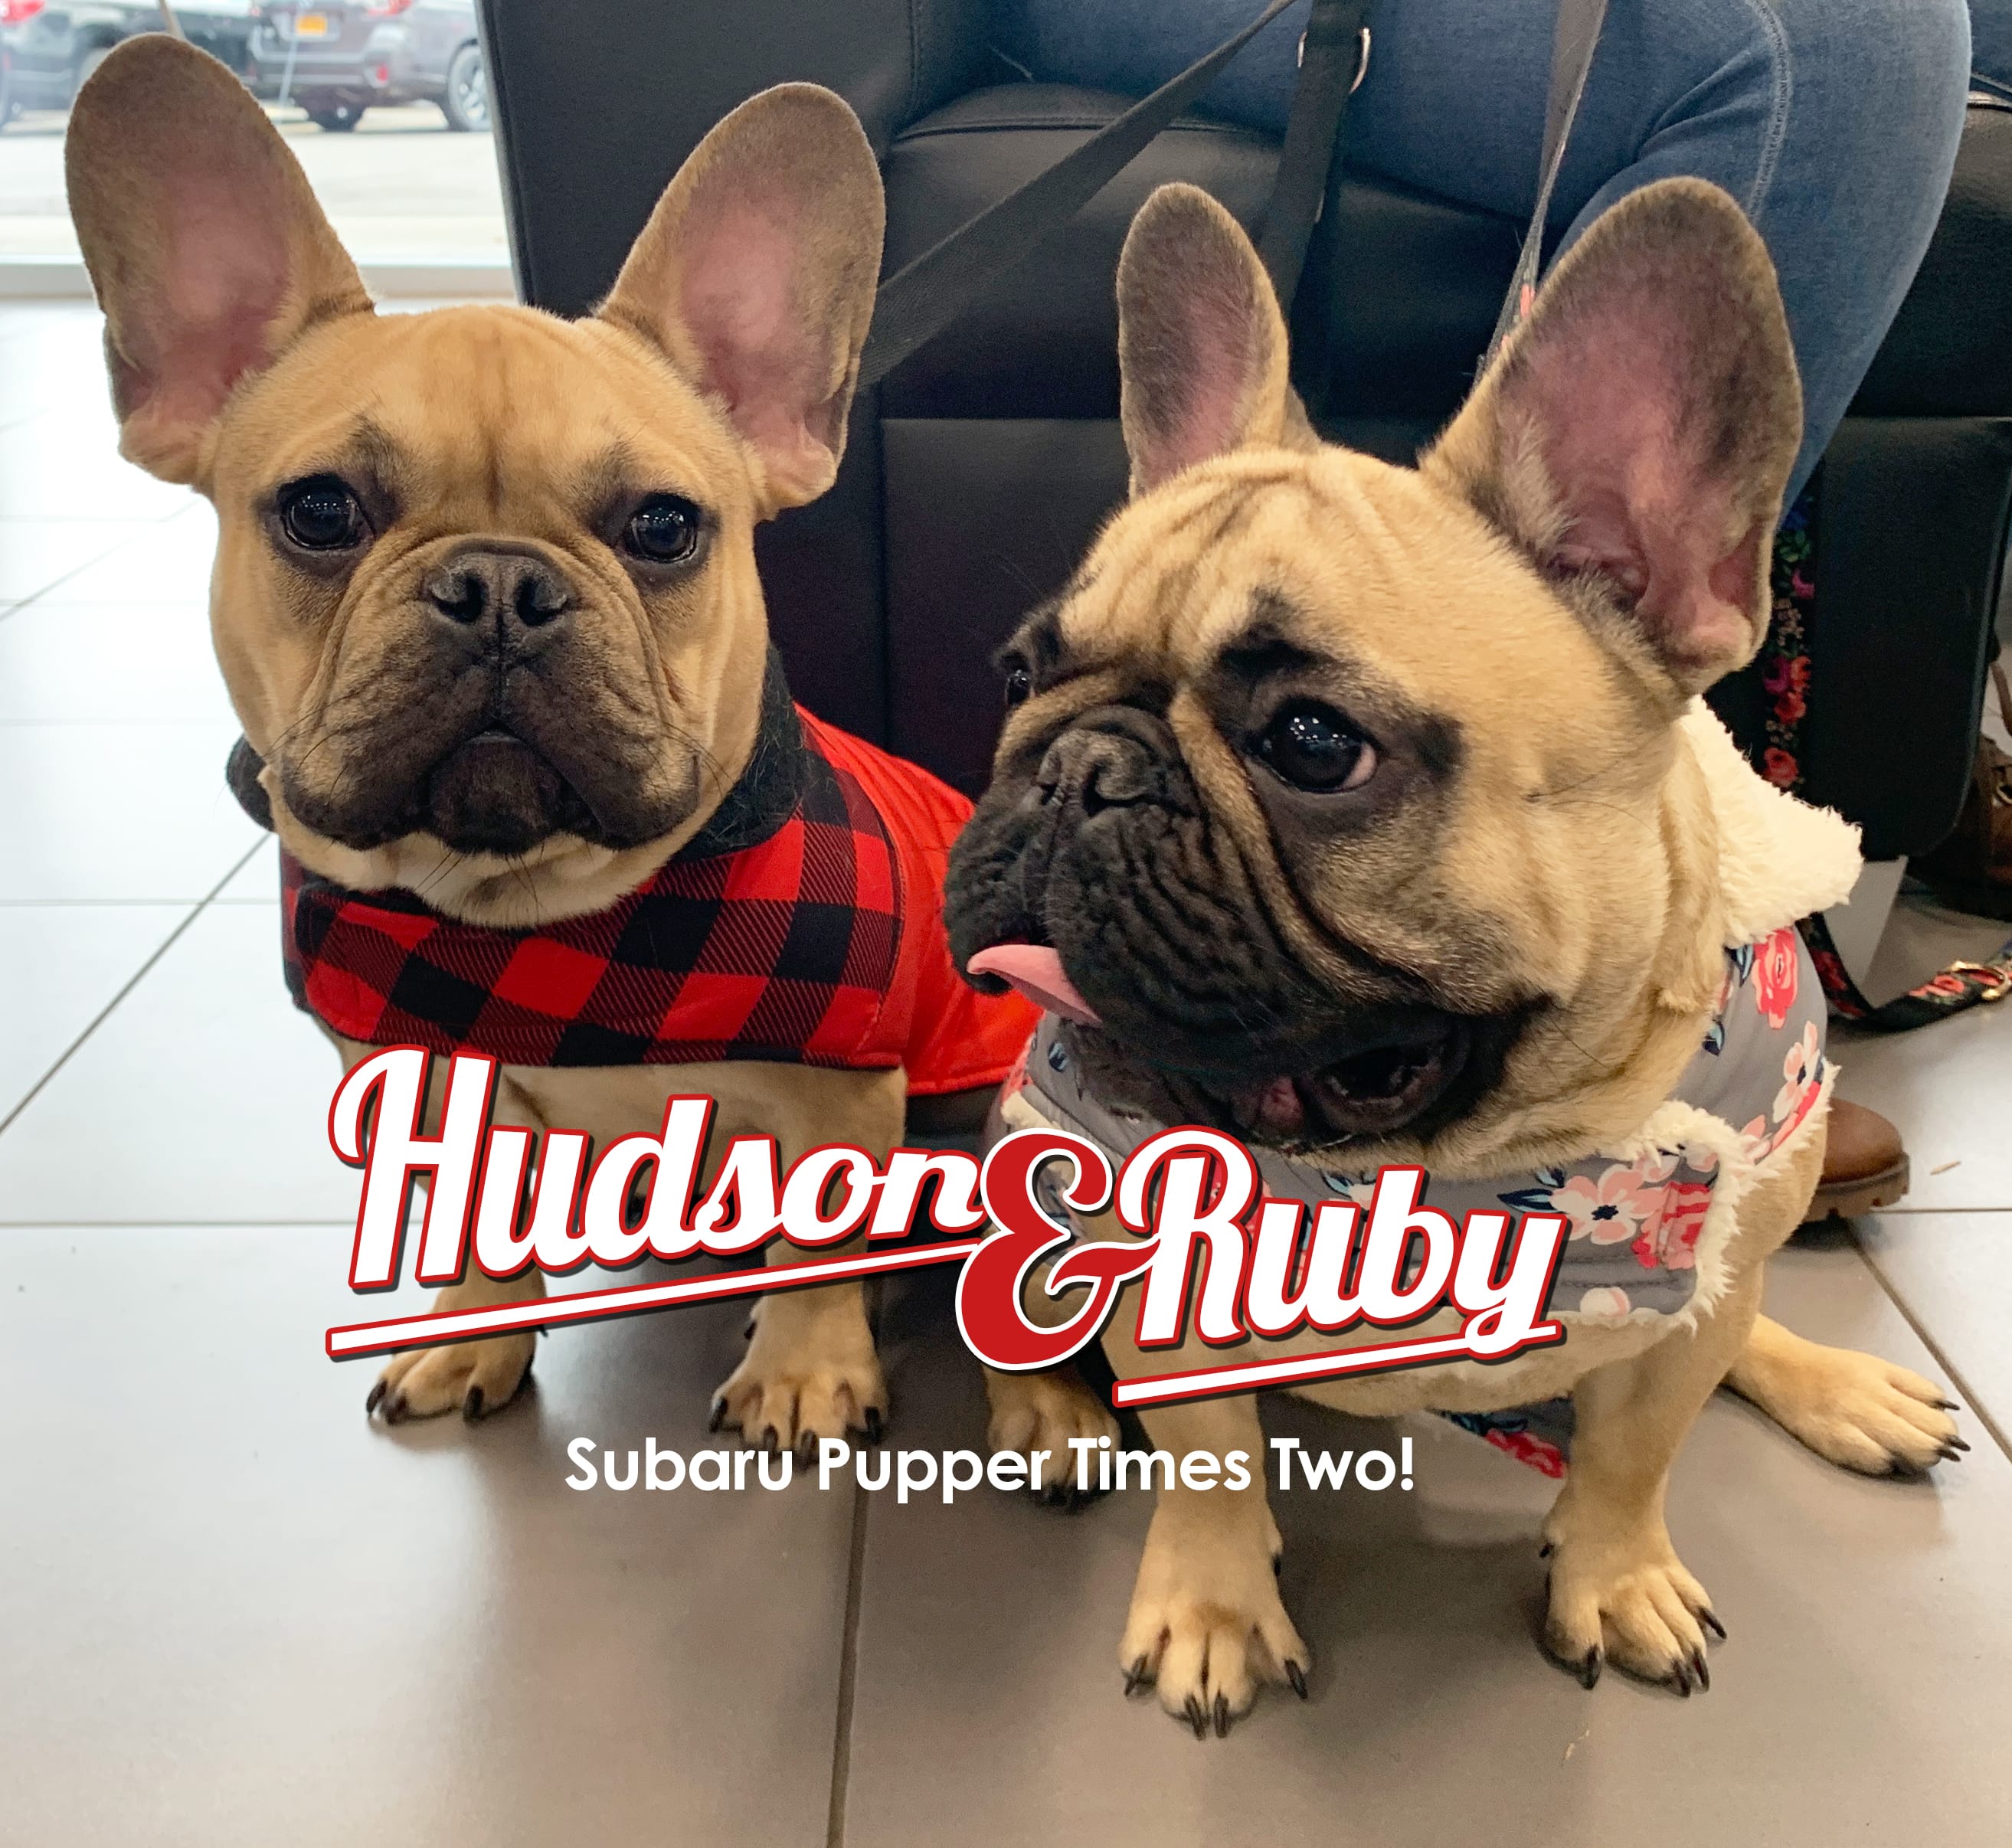 Hudson and Ruby - Subaru Puppers